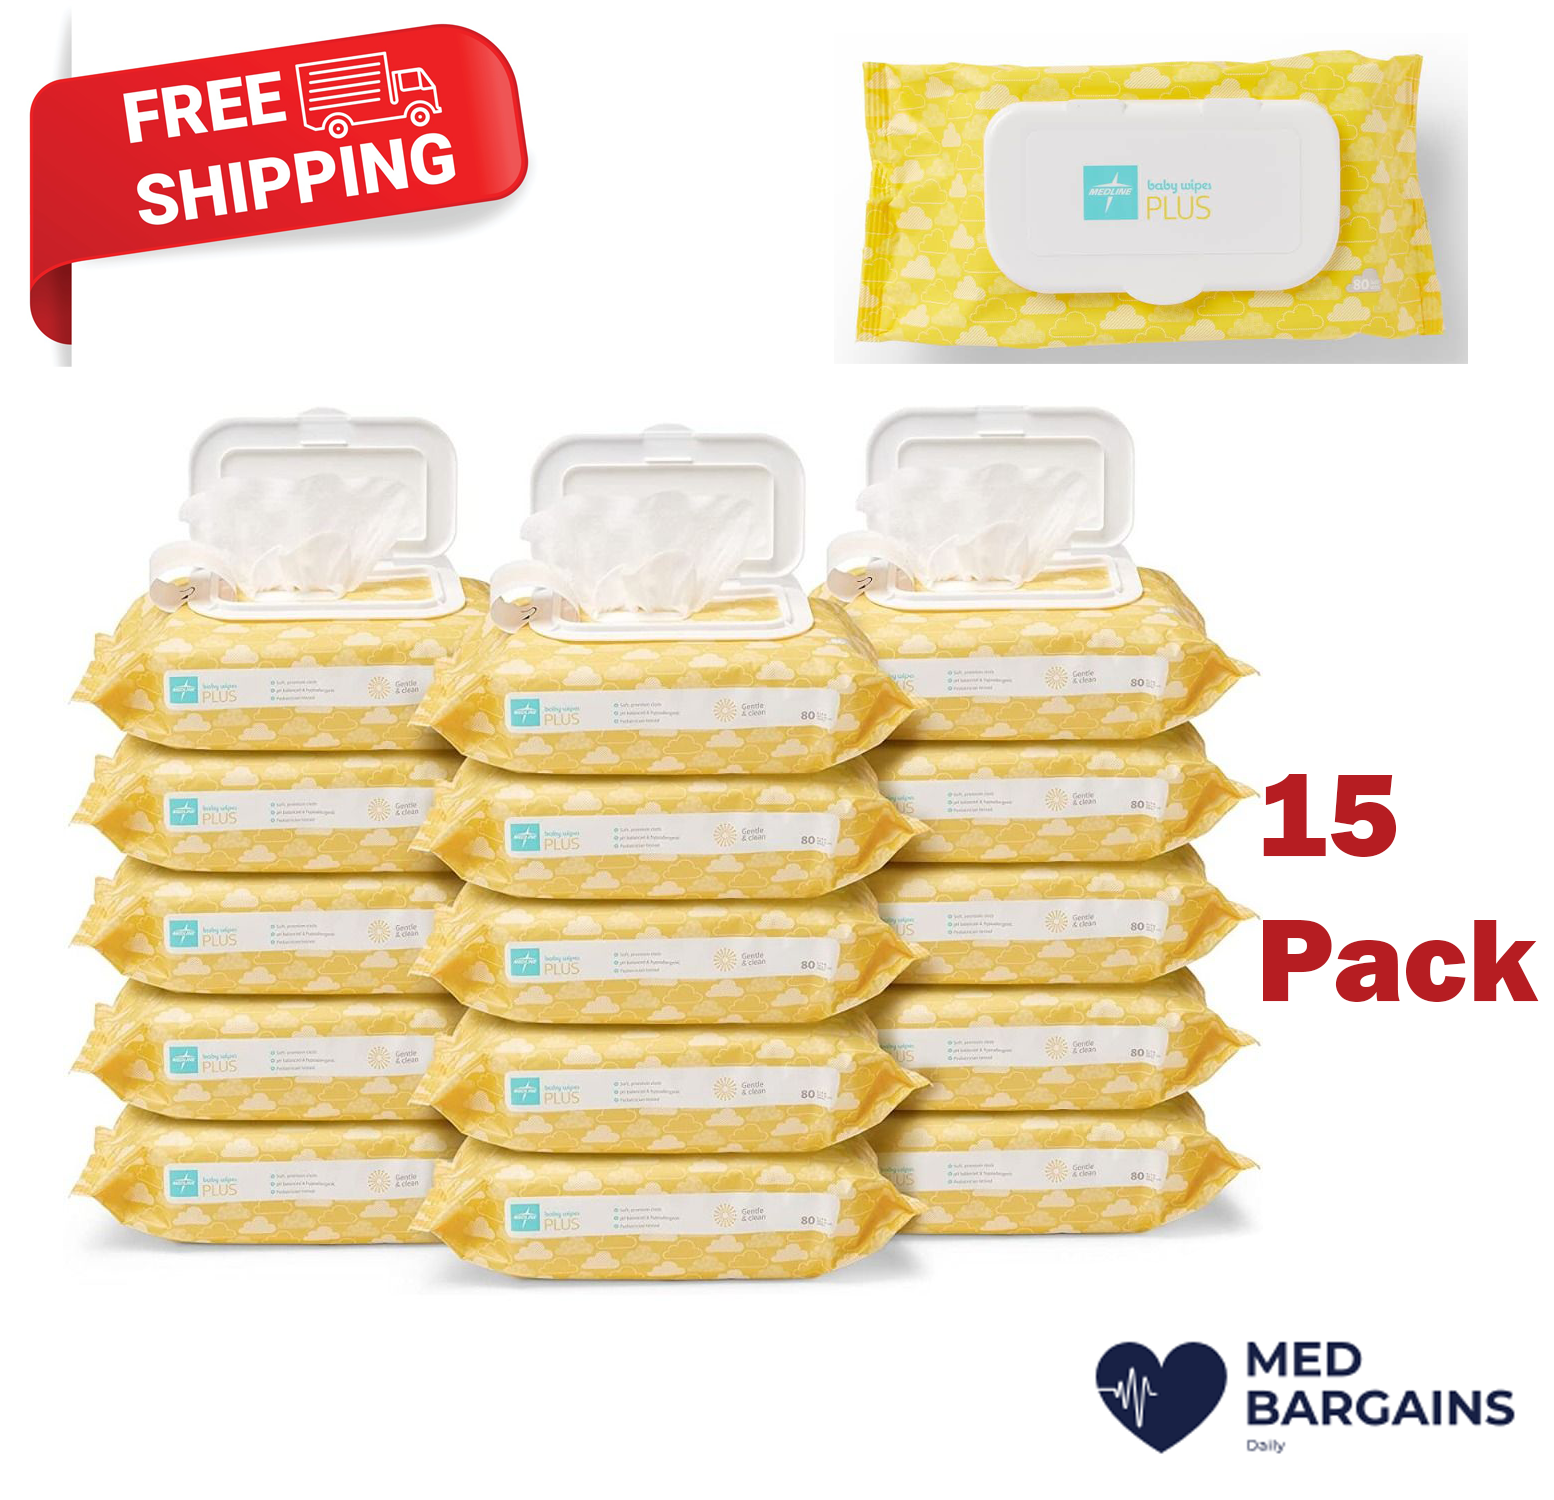 Lot of 15 Pack - Medline Hypoallergenic Scented Baby Wipes P